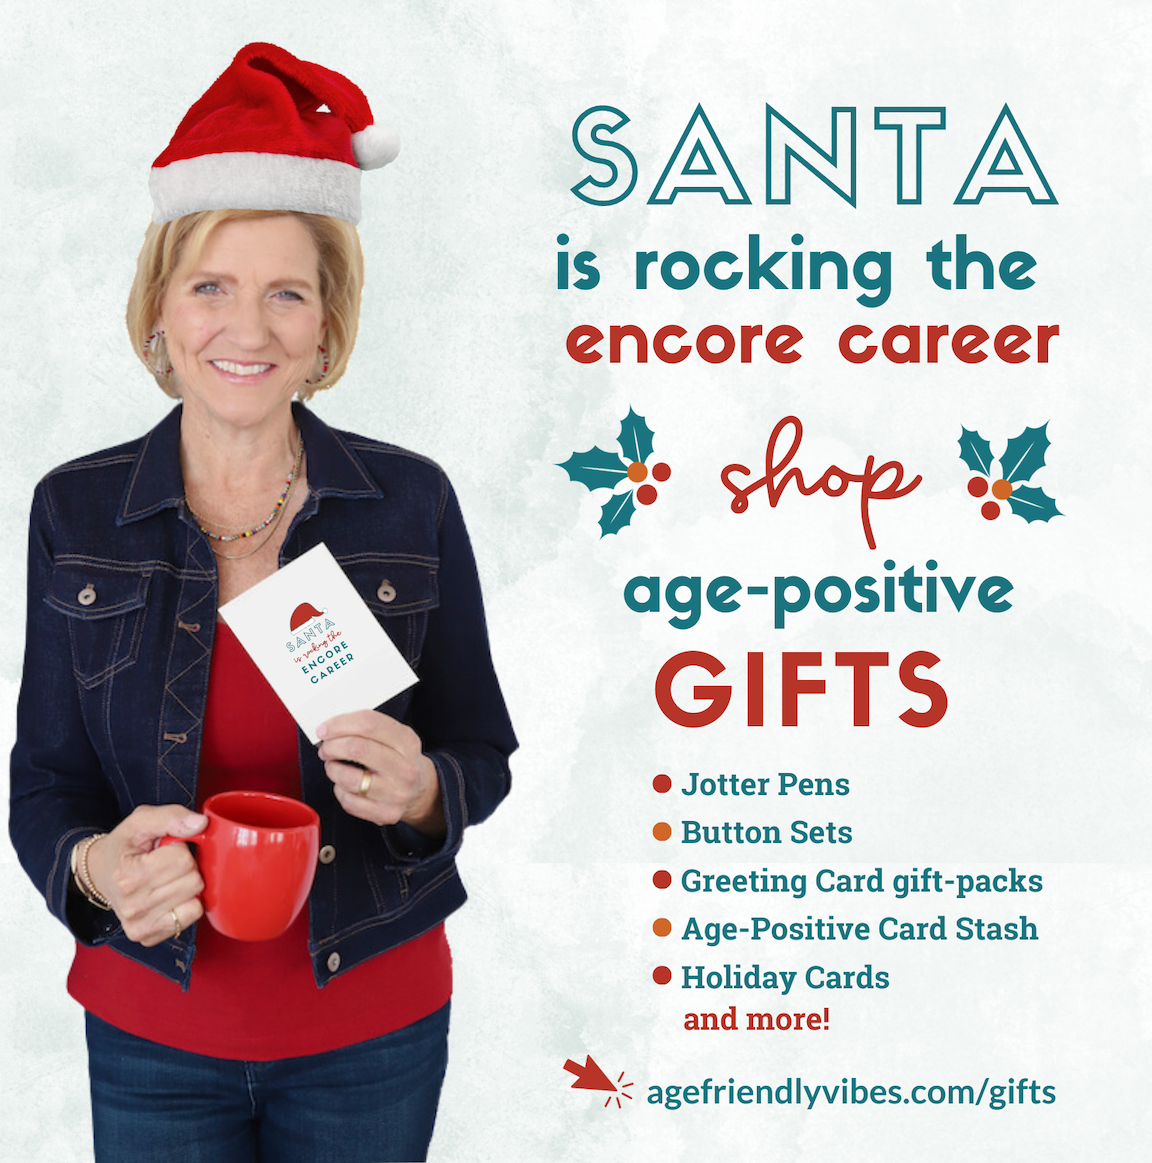 Changing the Narrative With Age-Positive Gifts